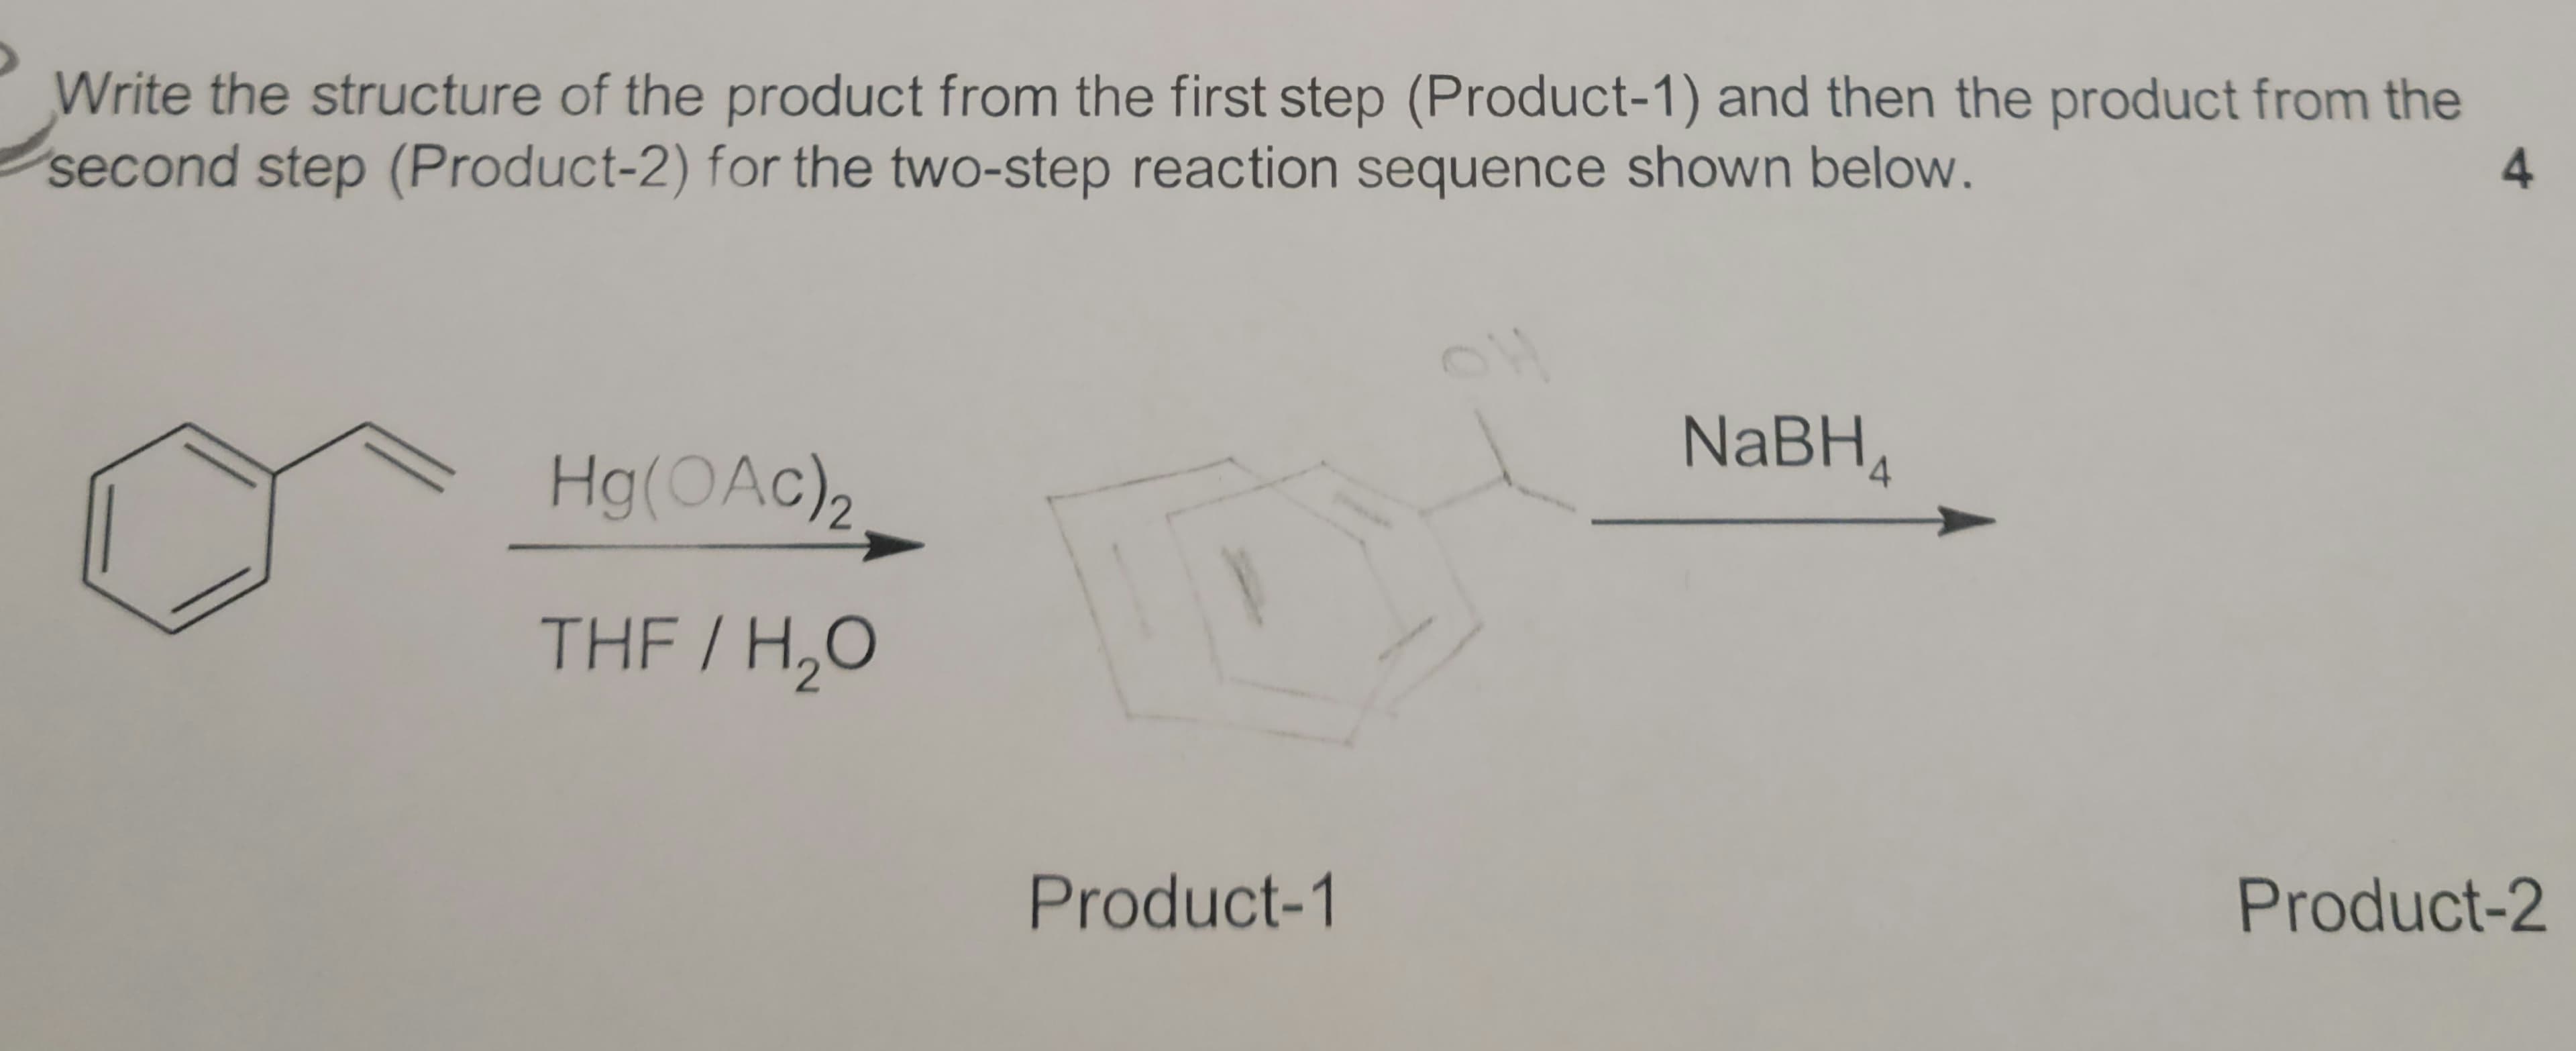 Write the structure of the product from the first step (Product-1) and then the product from the
second step (Product-2) for the two-step reaction sequence shown below.
4.
NaBH,
Hg(OAc)2
THF / H,O
Product-2
Product-1
